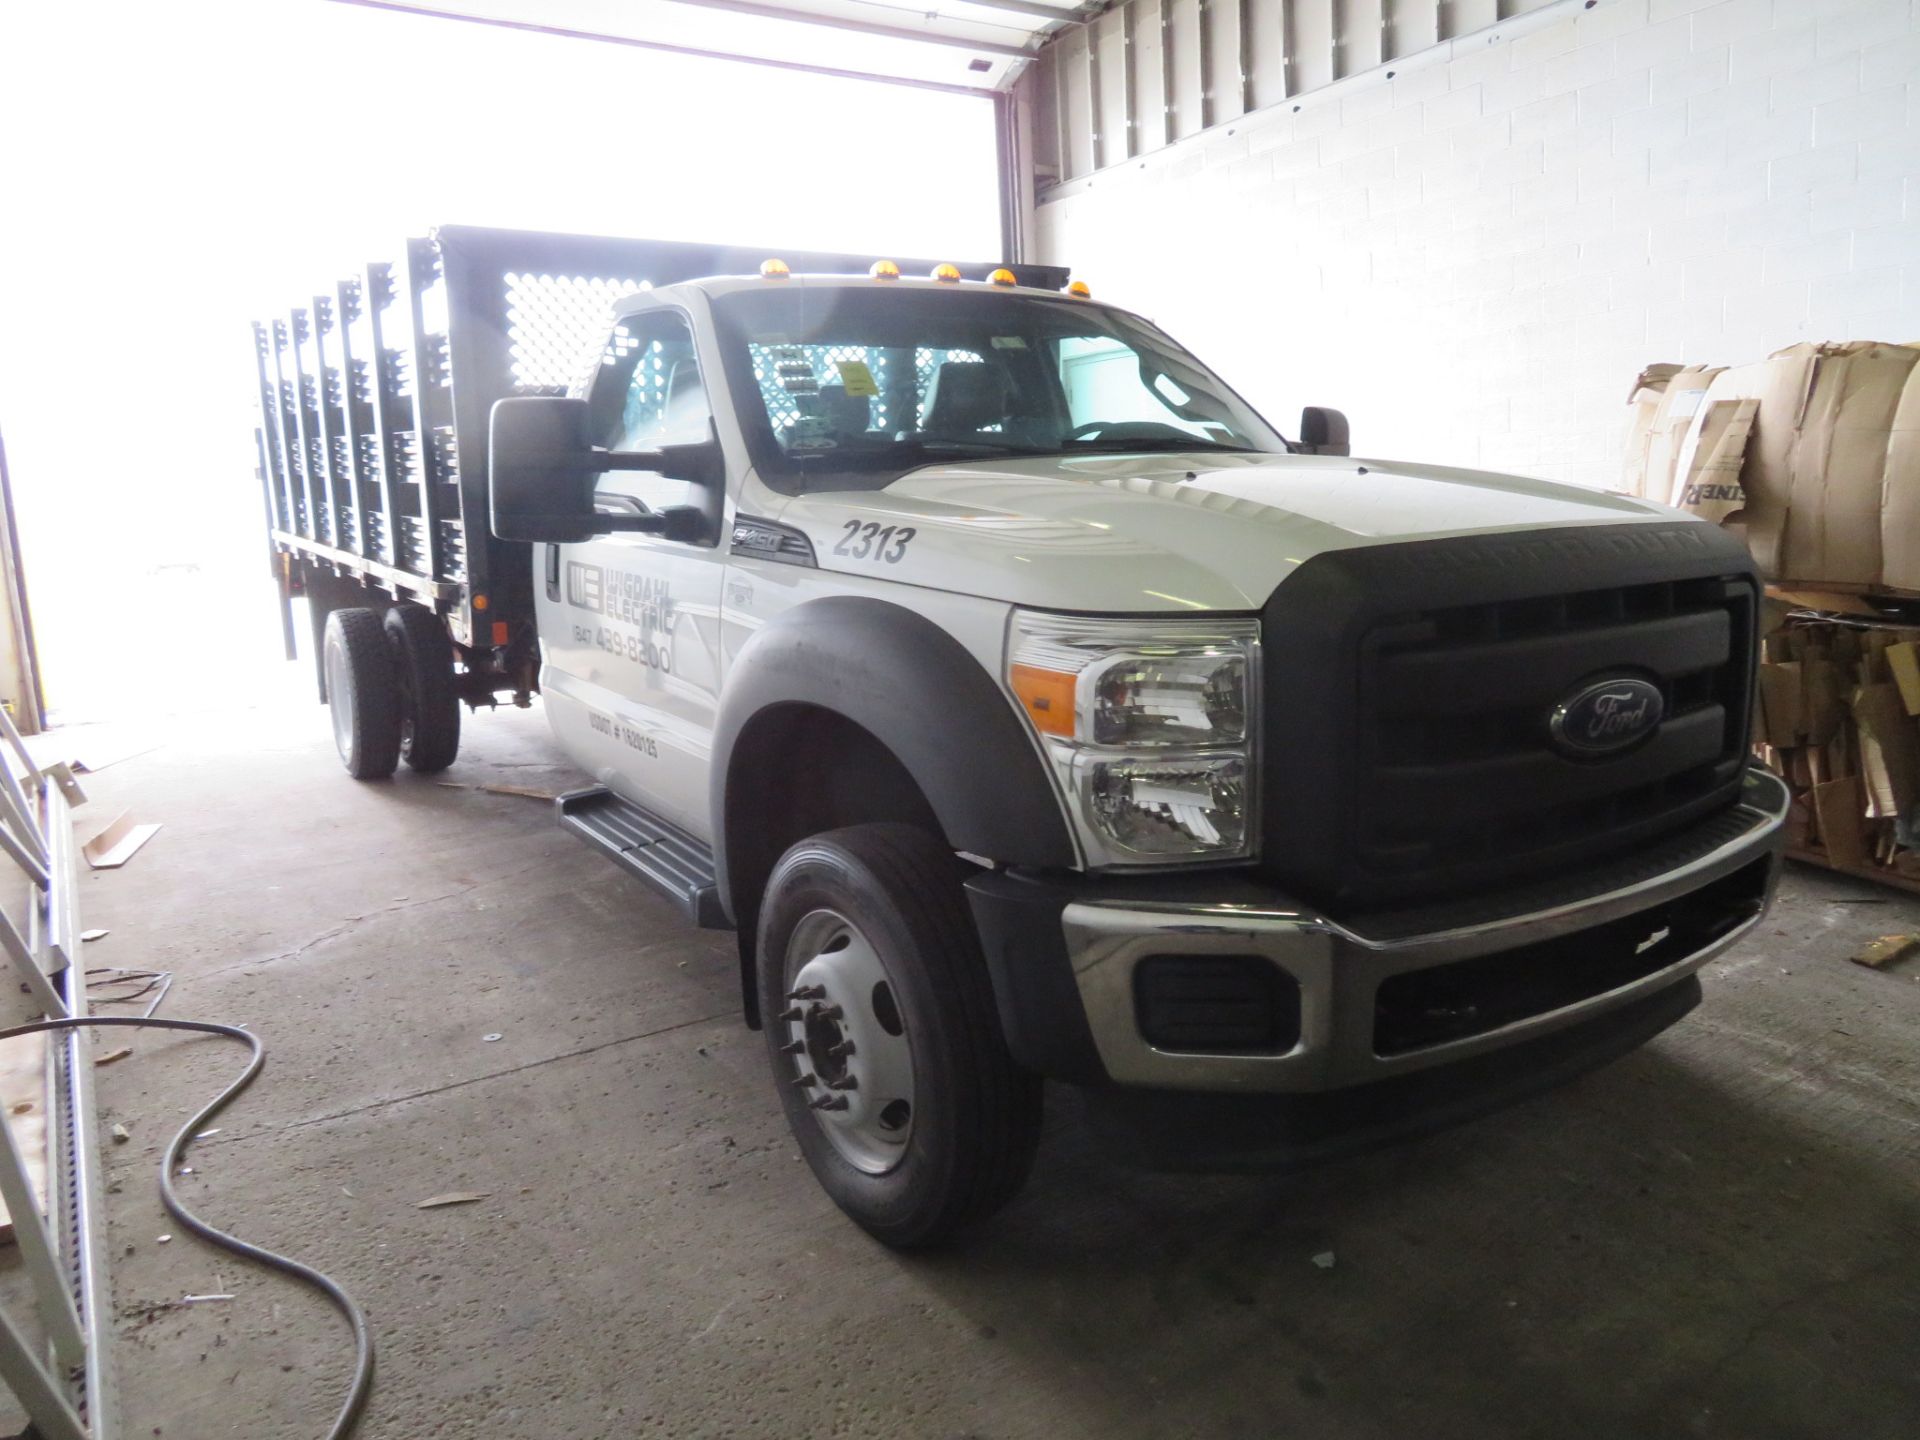 2012 Ford F-450 Super Duty 14 ft. Stake Bed Truck, VIN 1FDTF4GYXCED00078, Gas, Automatic, Anthony - Image 2 of 5